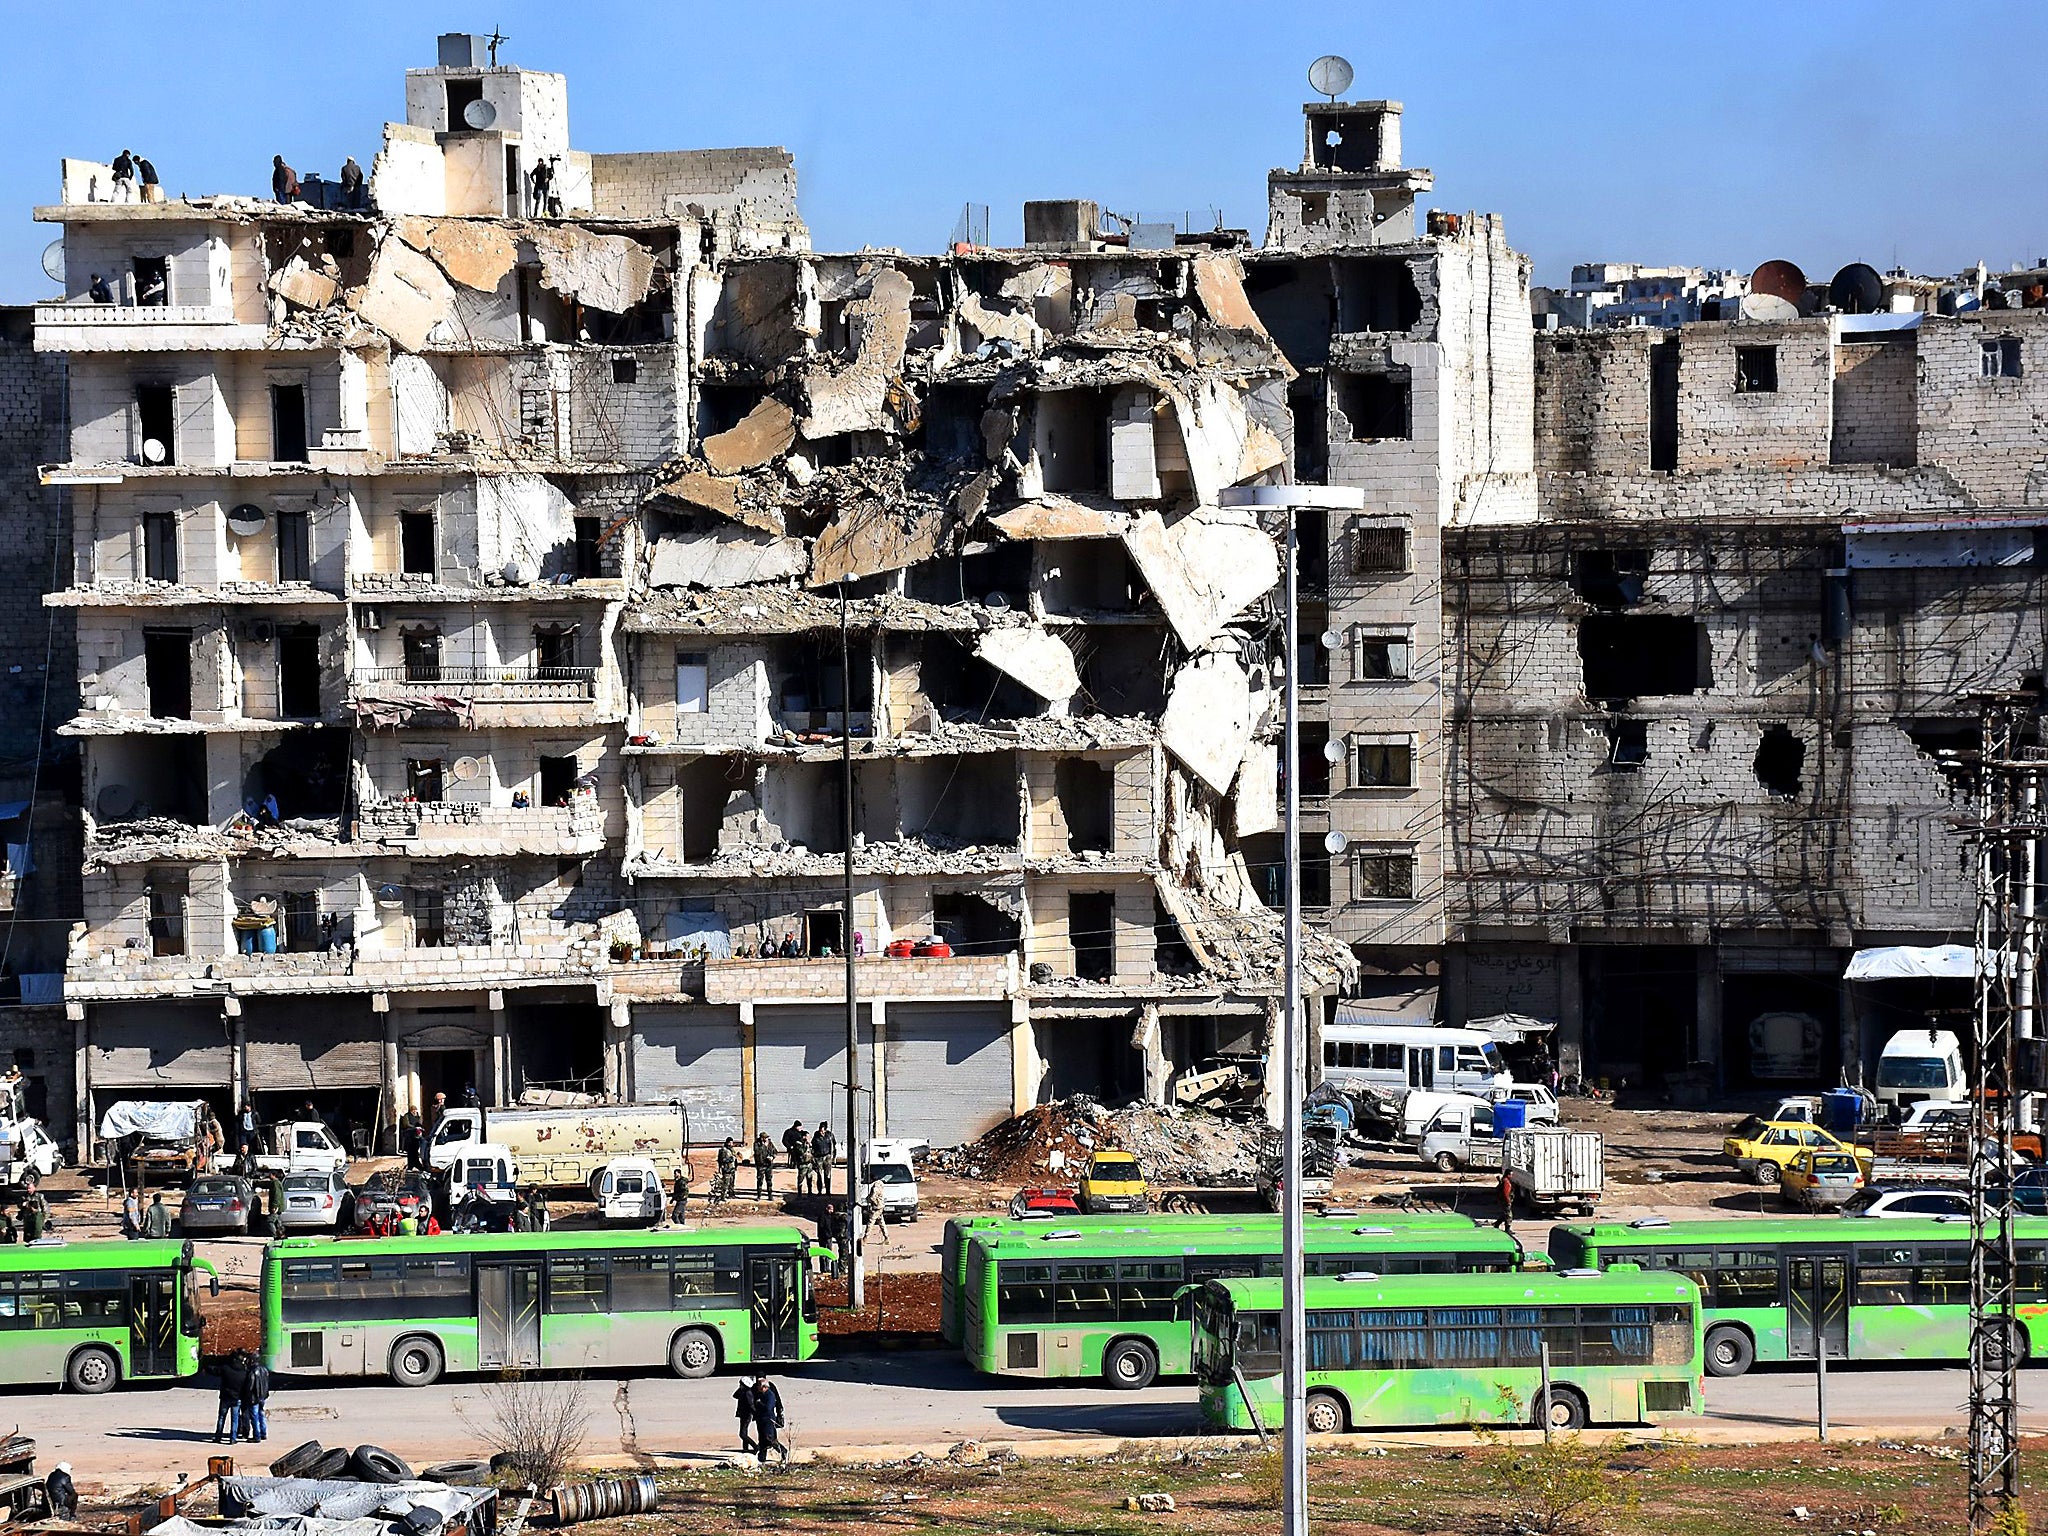 A block of flats destroyed by the ongoing battle in Aleppo